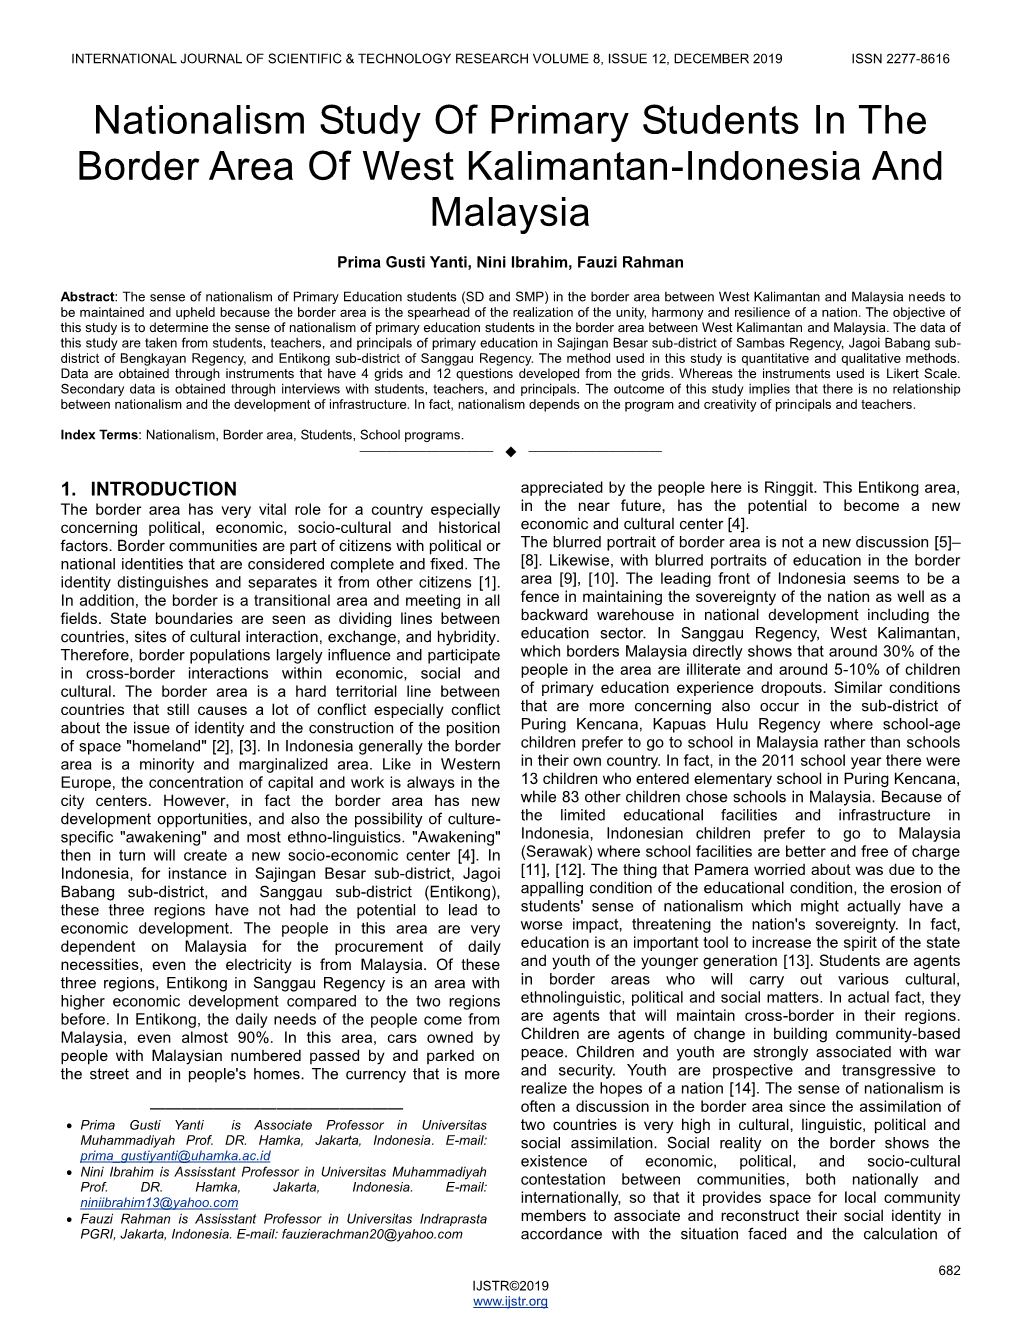 Nationalism Study of Primary Students in the Border Area of West Kalimantan-Indonesia and Malaysia